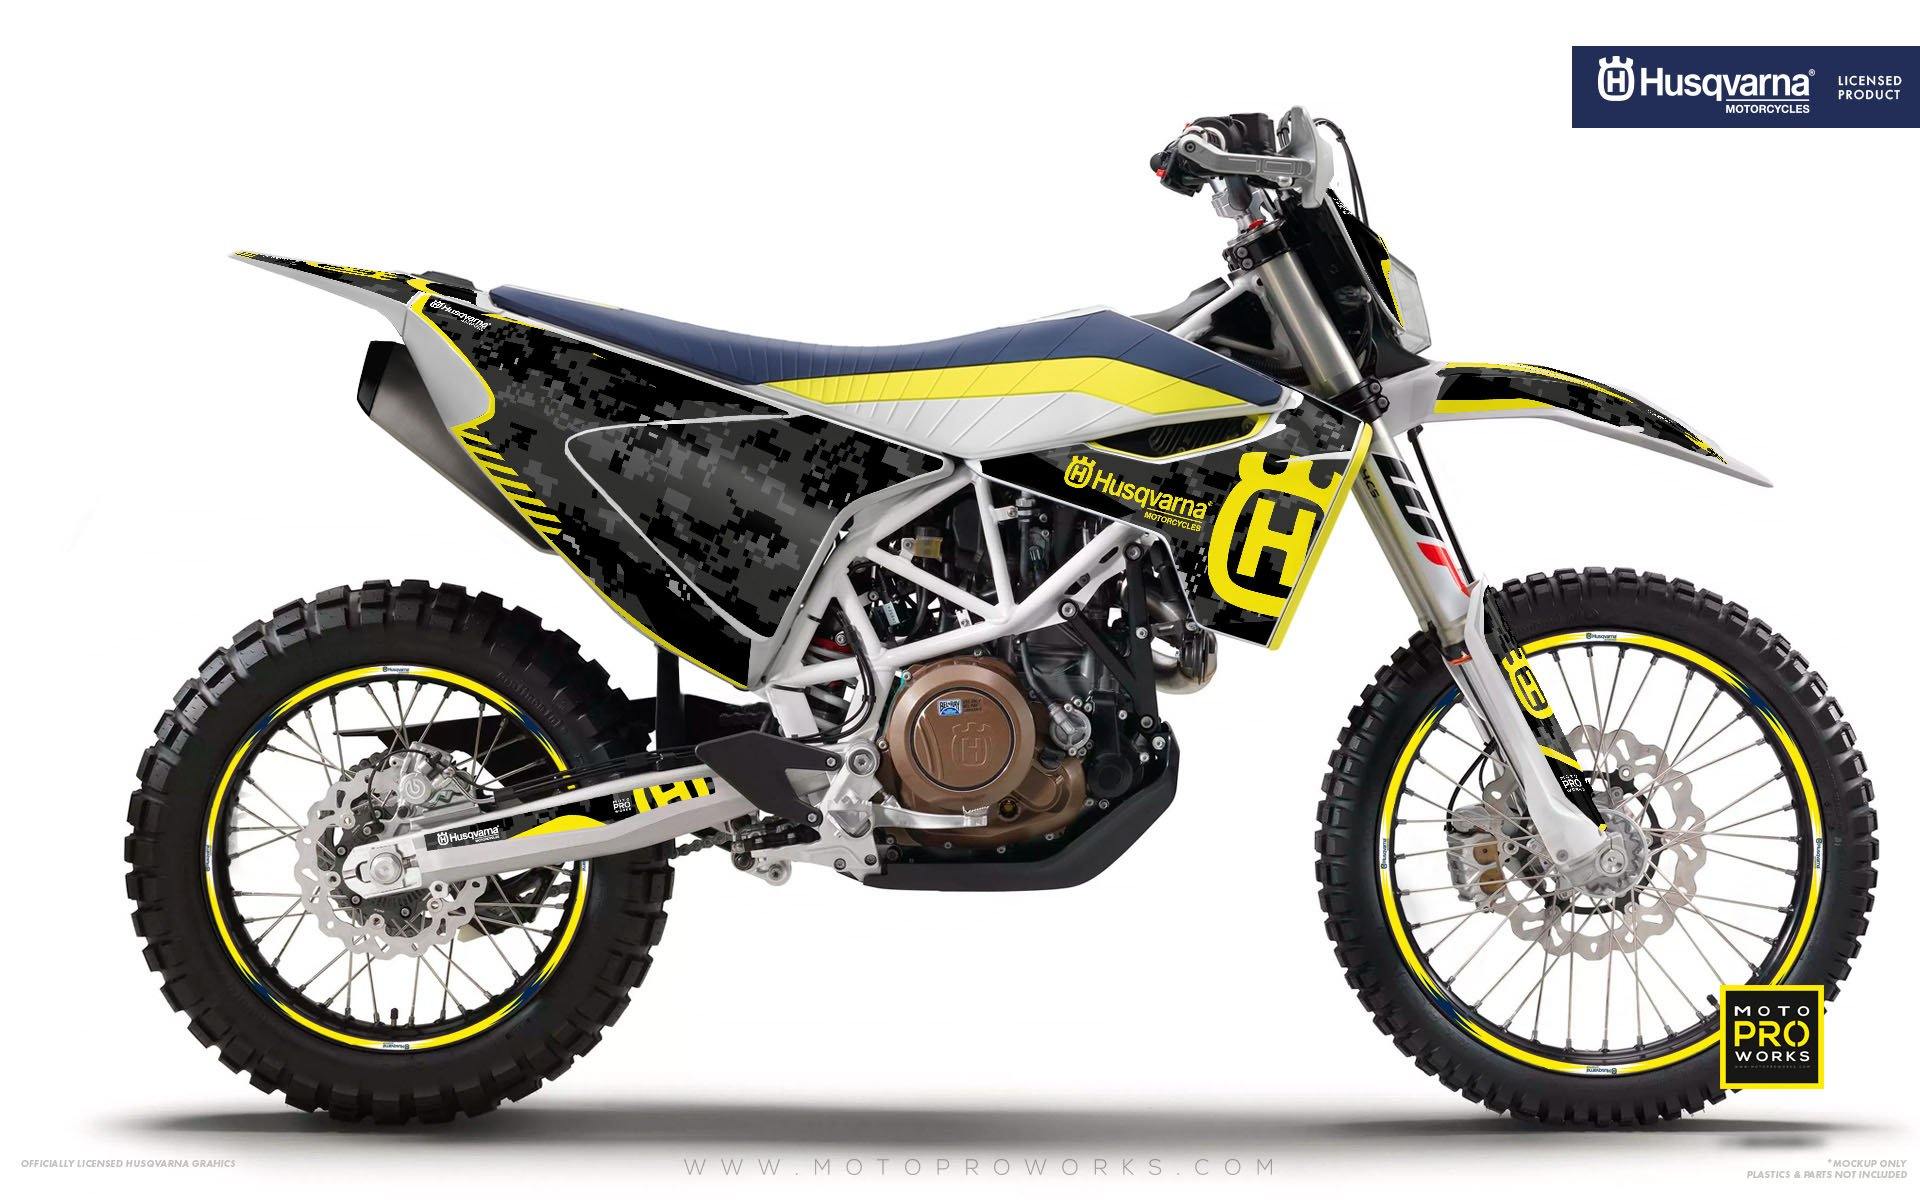 Husqvarna GRAPHIC KIT - "FACTOR" (Marpatcamo/yellow) - MotoProWorks | Decals and Bike Graphic kit